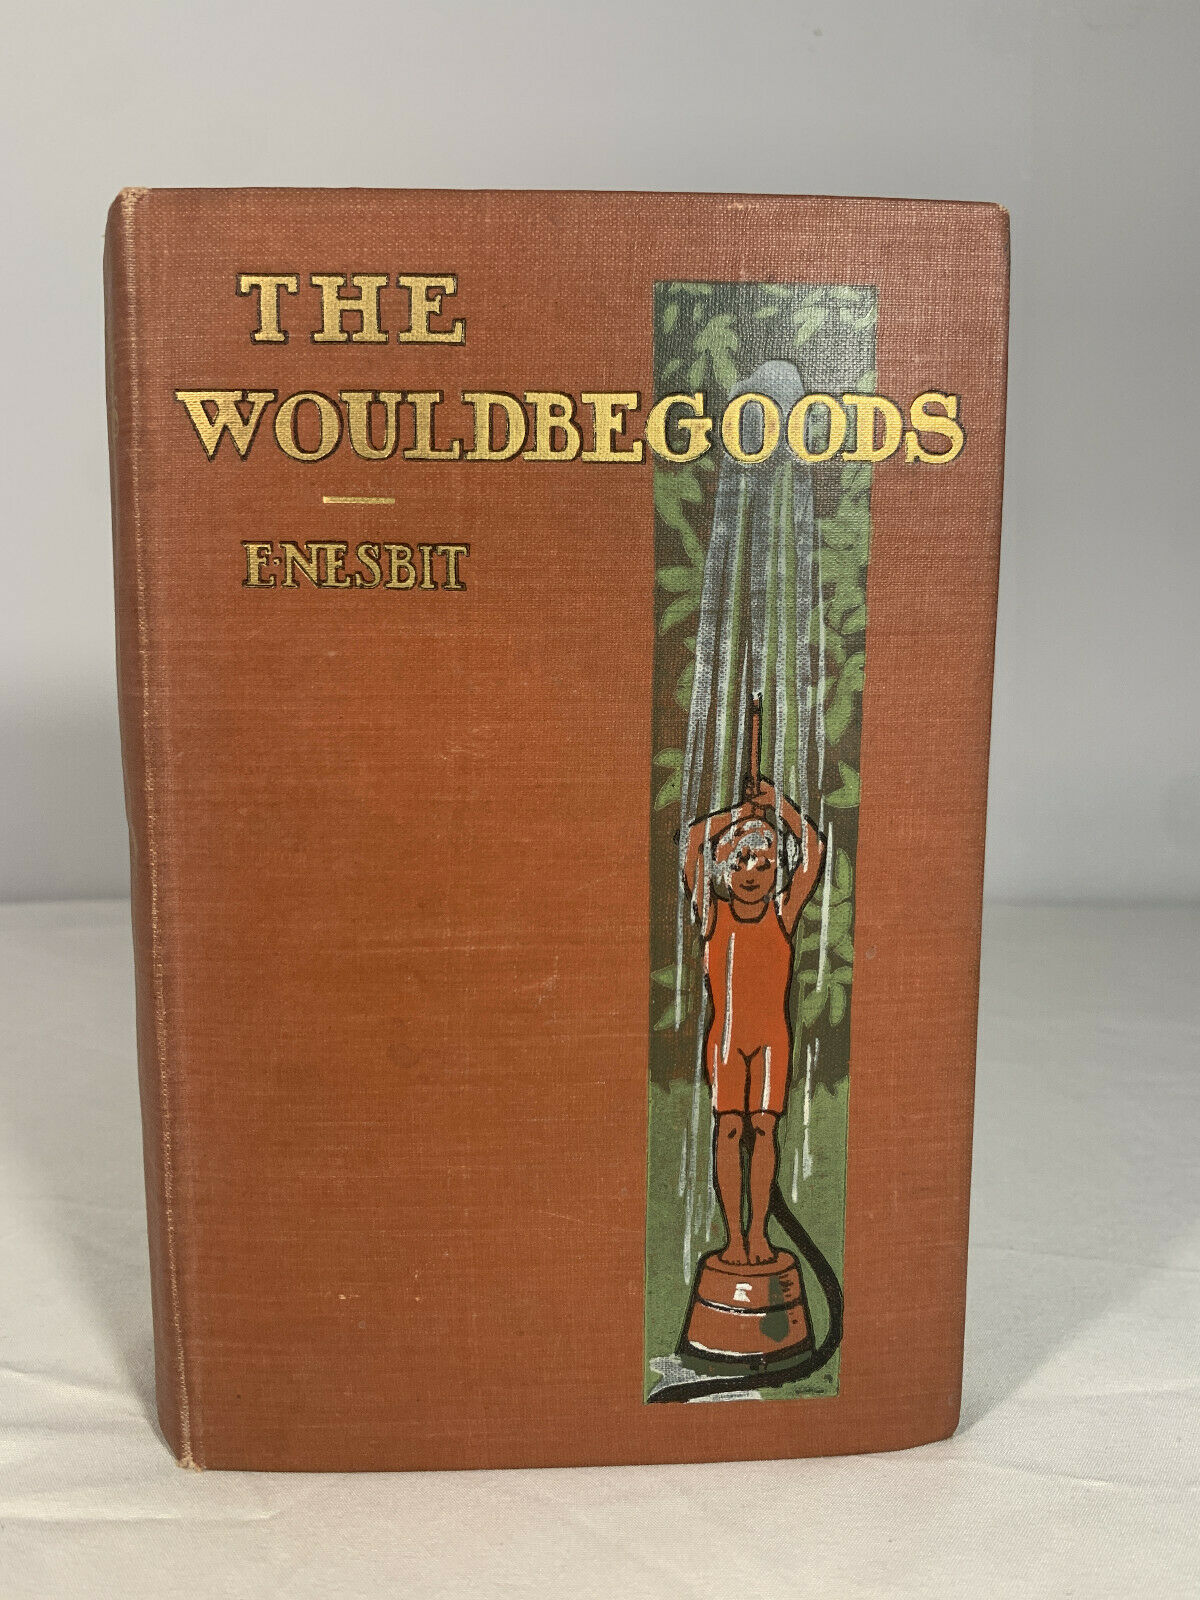 The Wouldbegoods by E. Nesbit 1901 Hardcover First American Edition